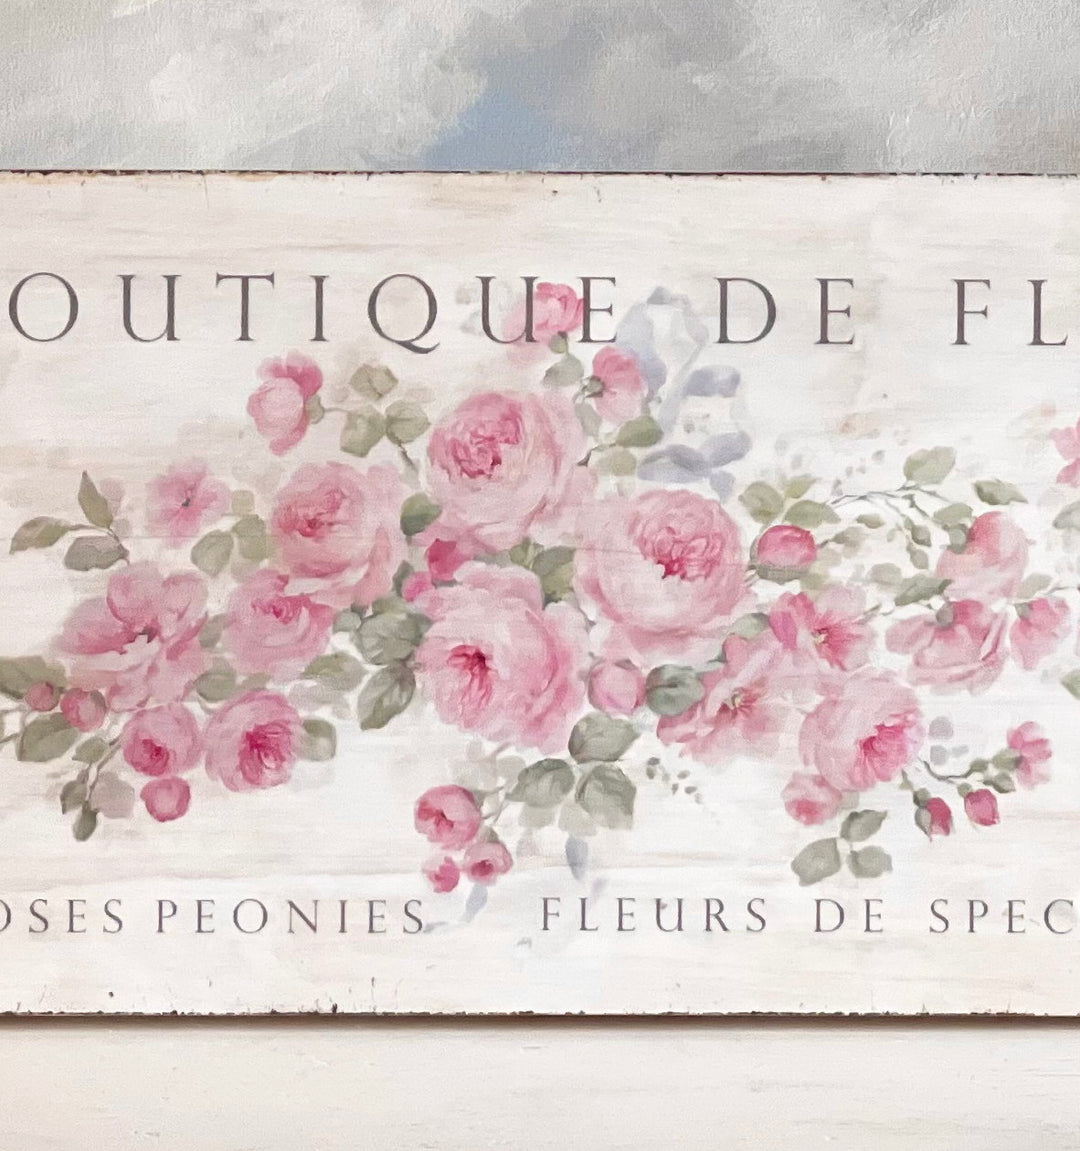 Shabby French Chic Pink Roses Wood Sign " Le Boutique De Fleurs" by Debi Coules